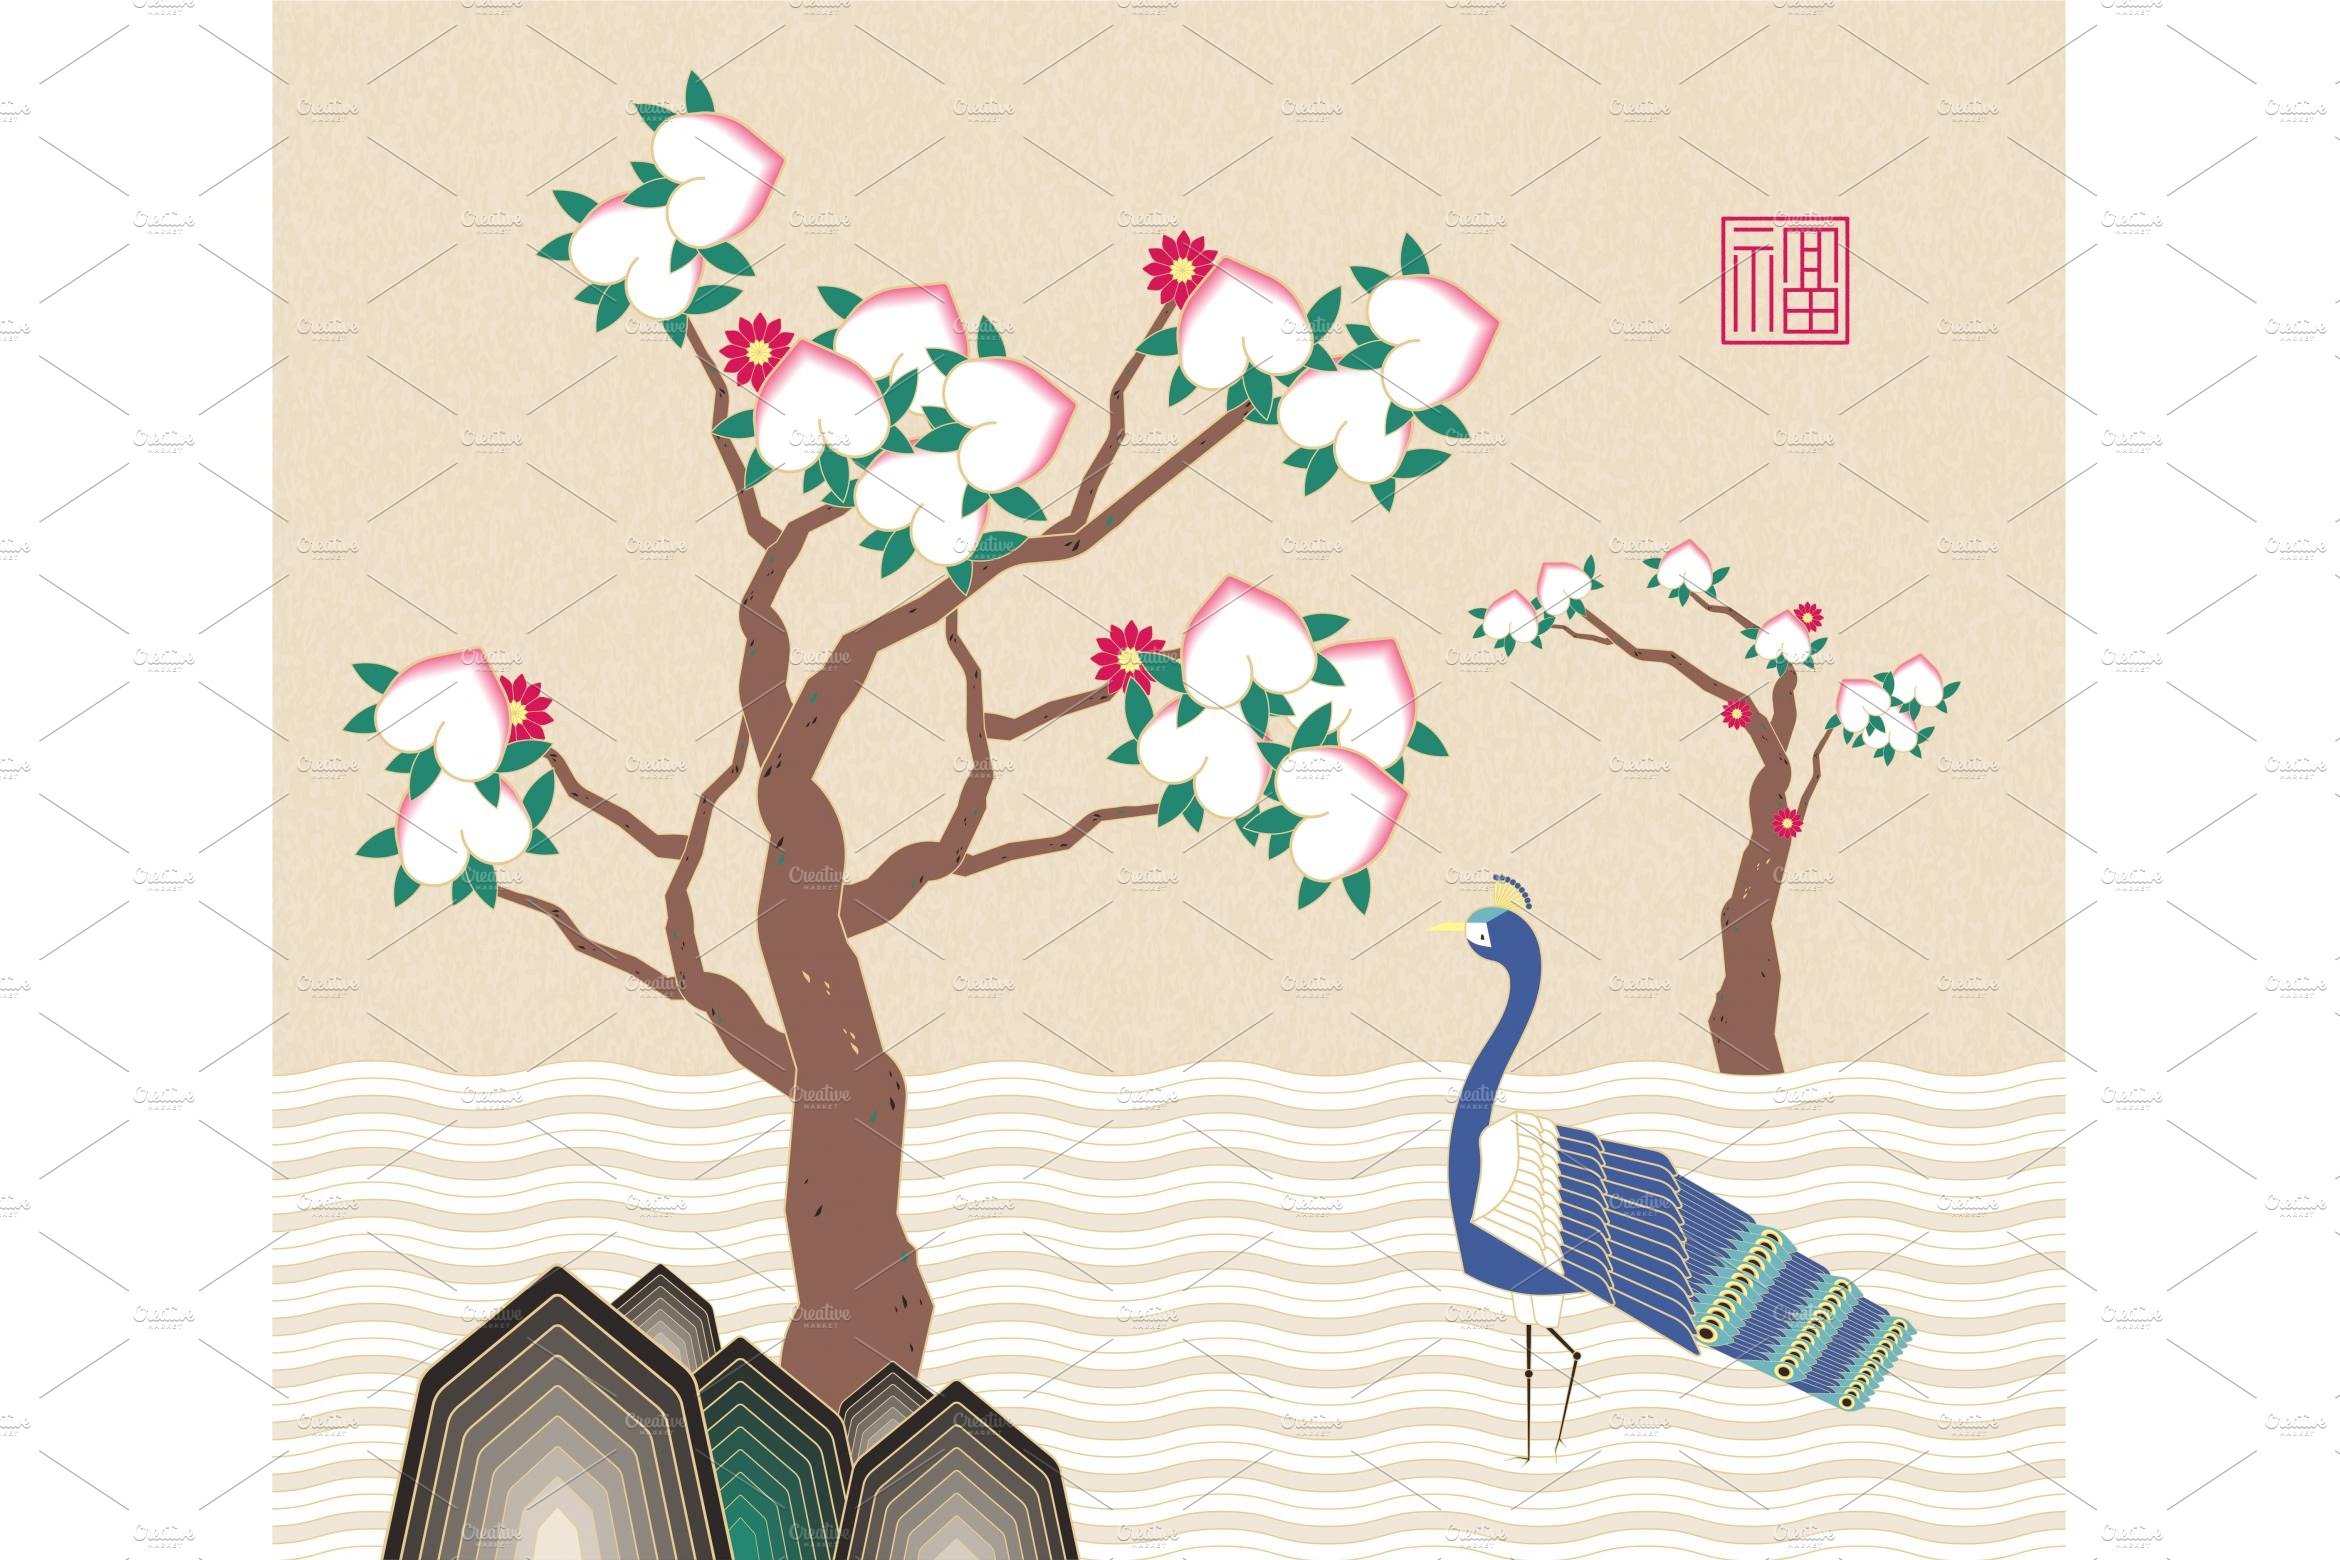 Peacock and peach tree cover image.